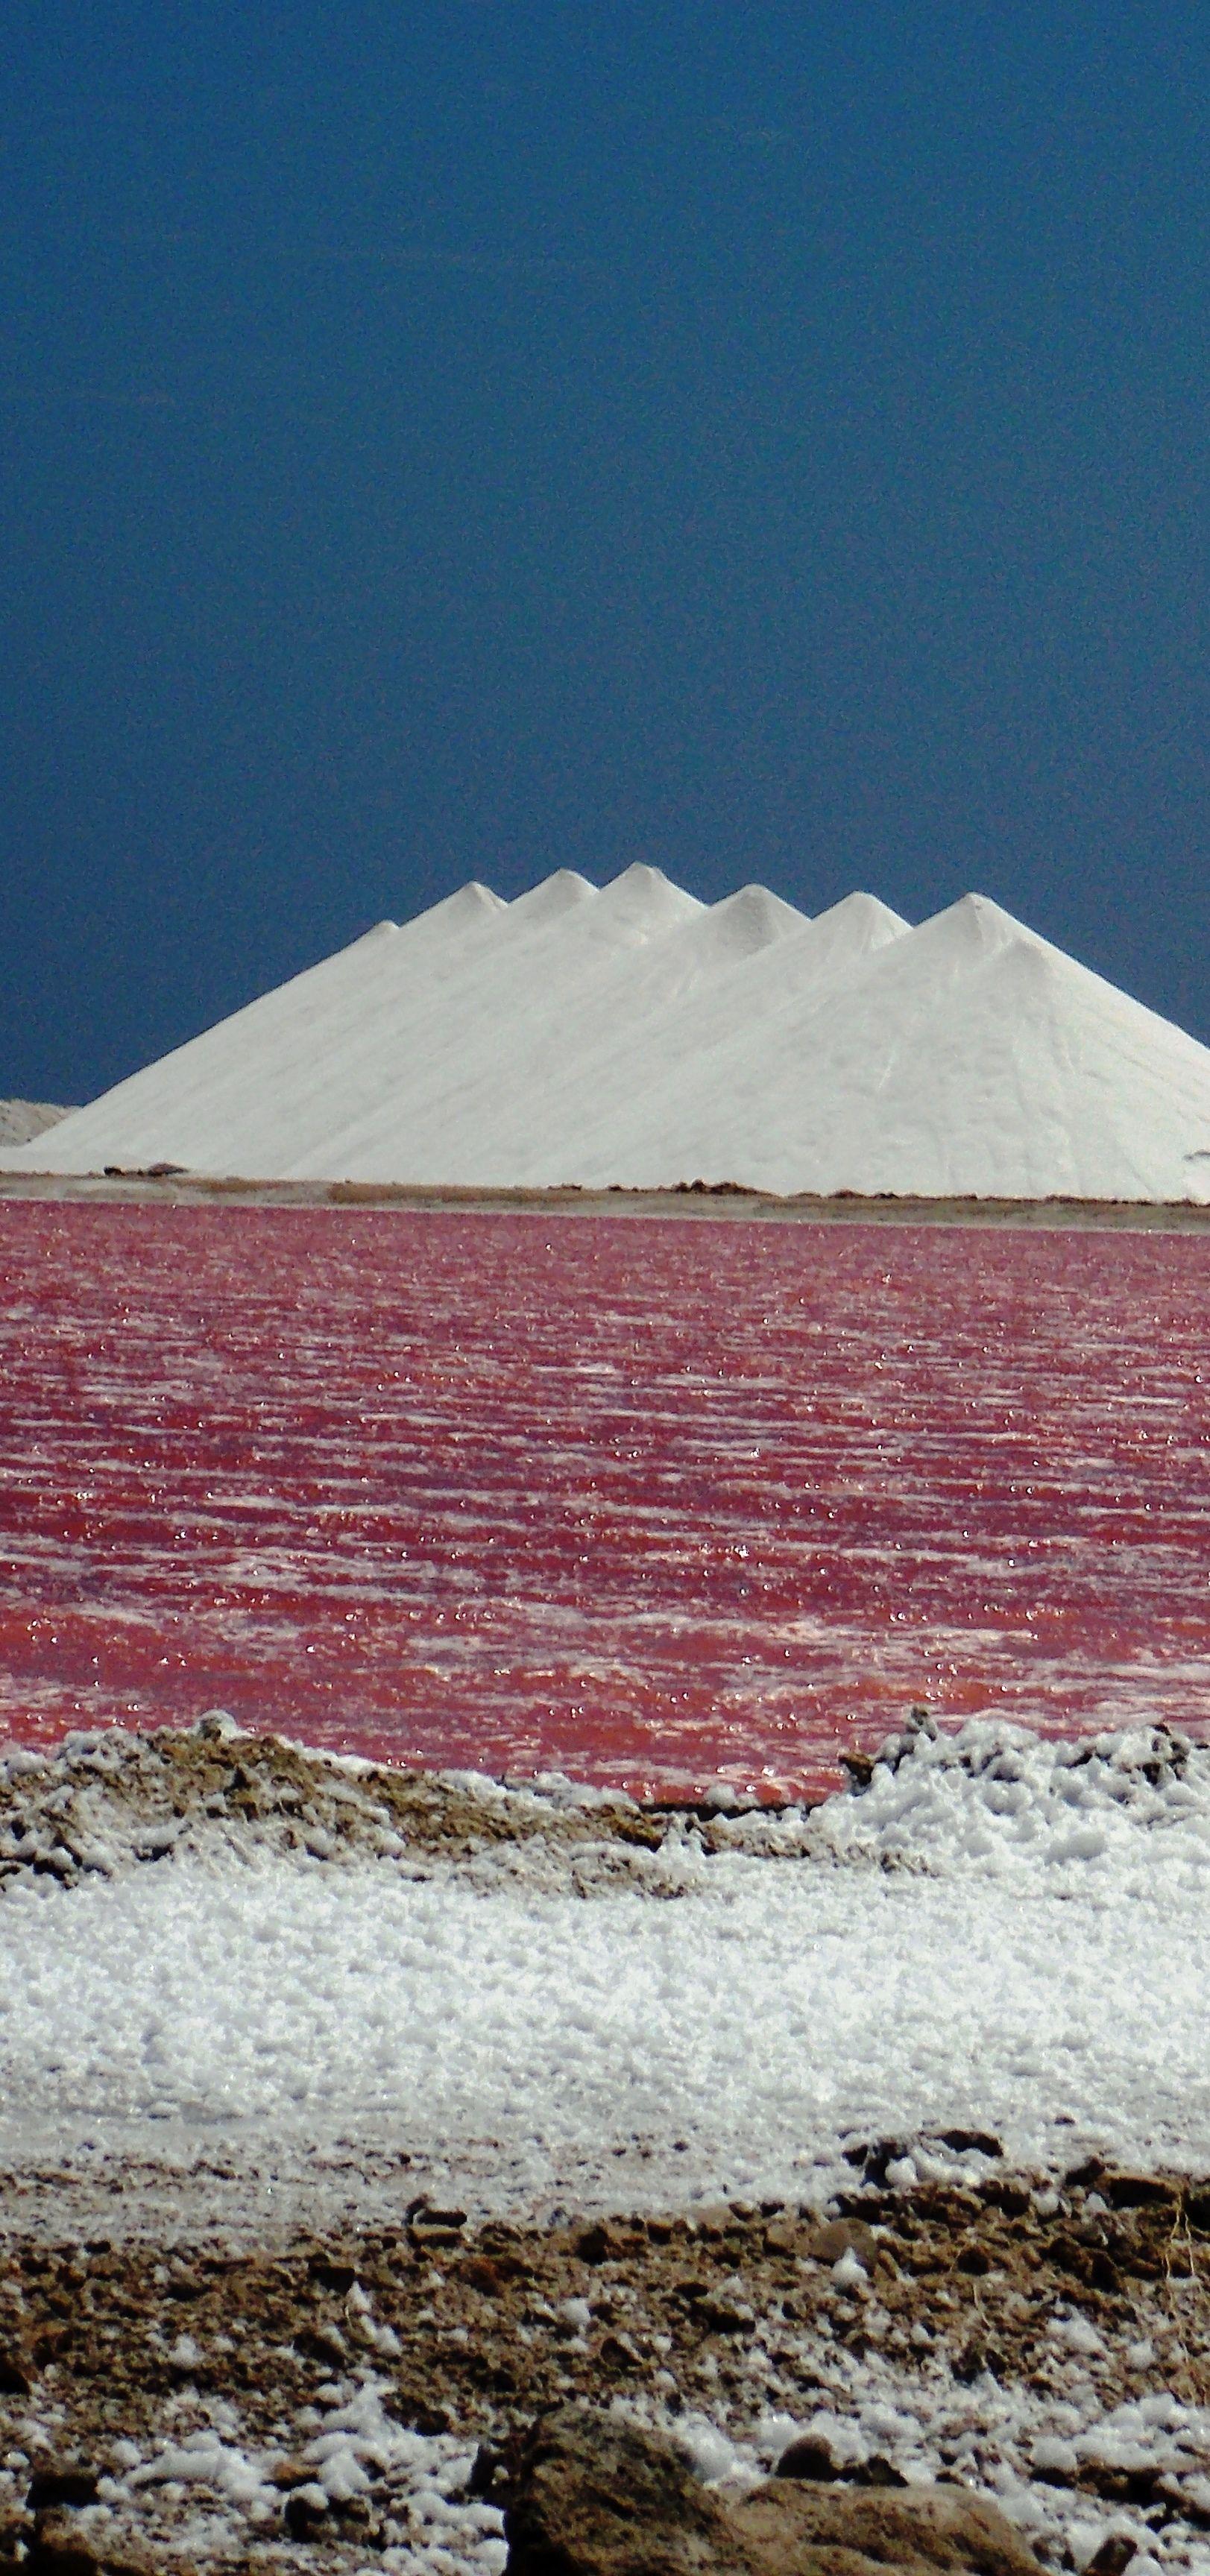 Pink Water with Mountains Logo - Pink water of the Bonaire salt pans and mountains of salt in the ...